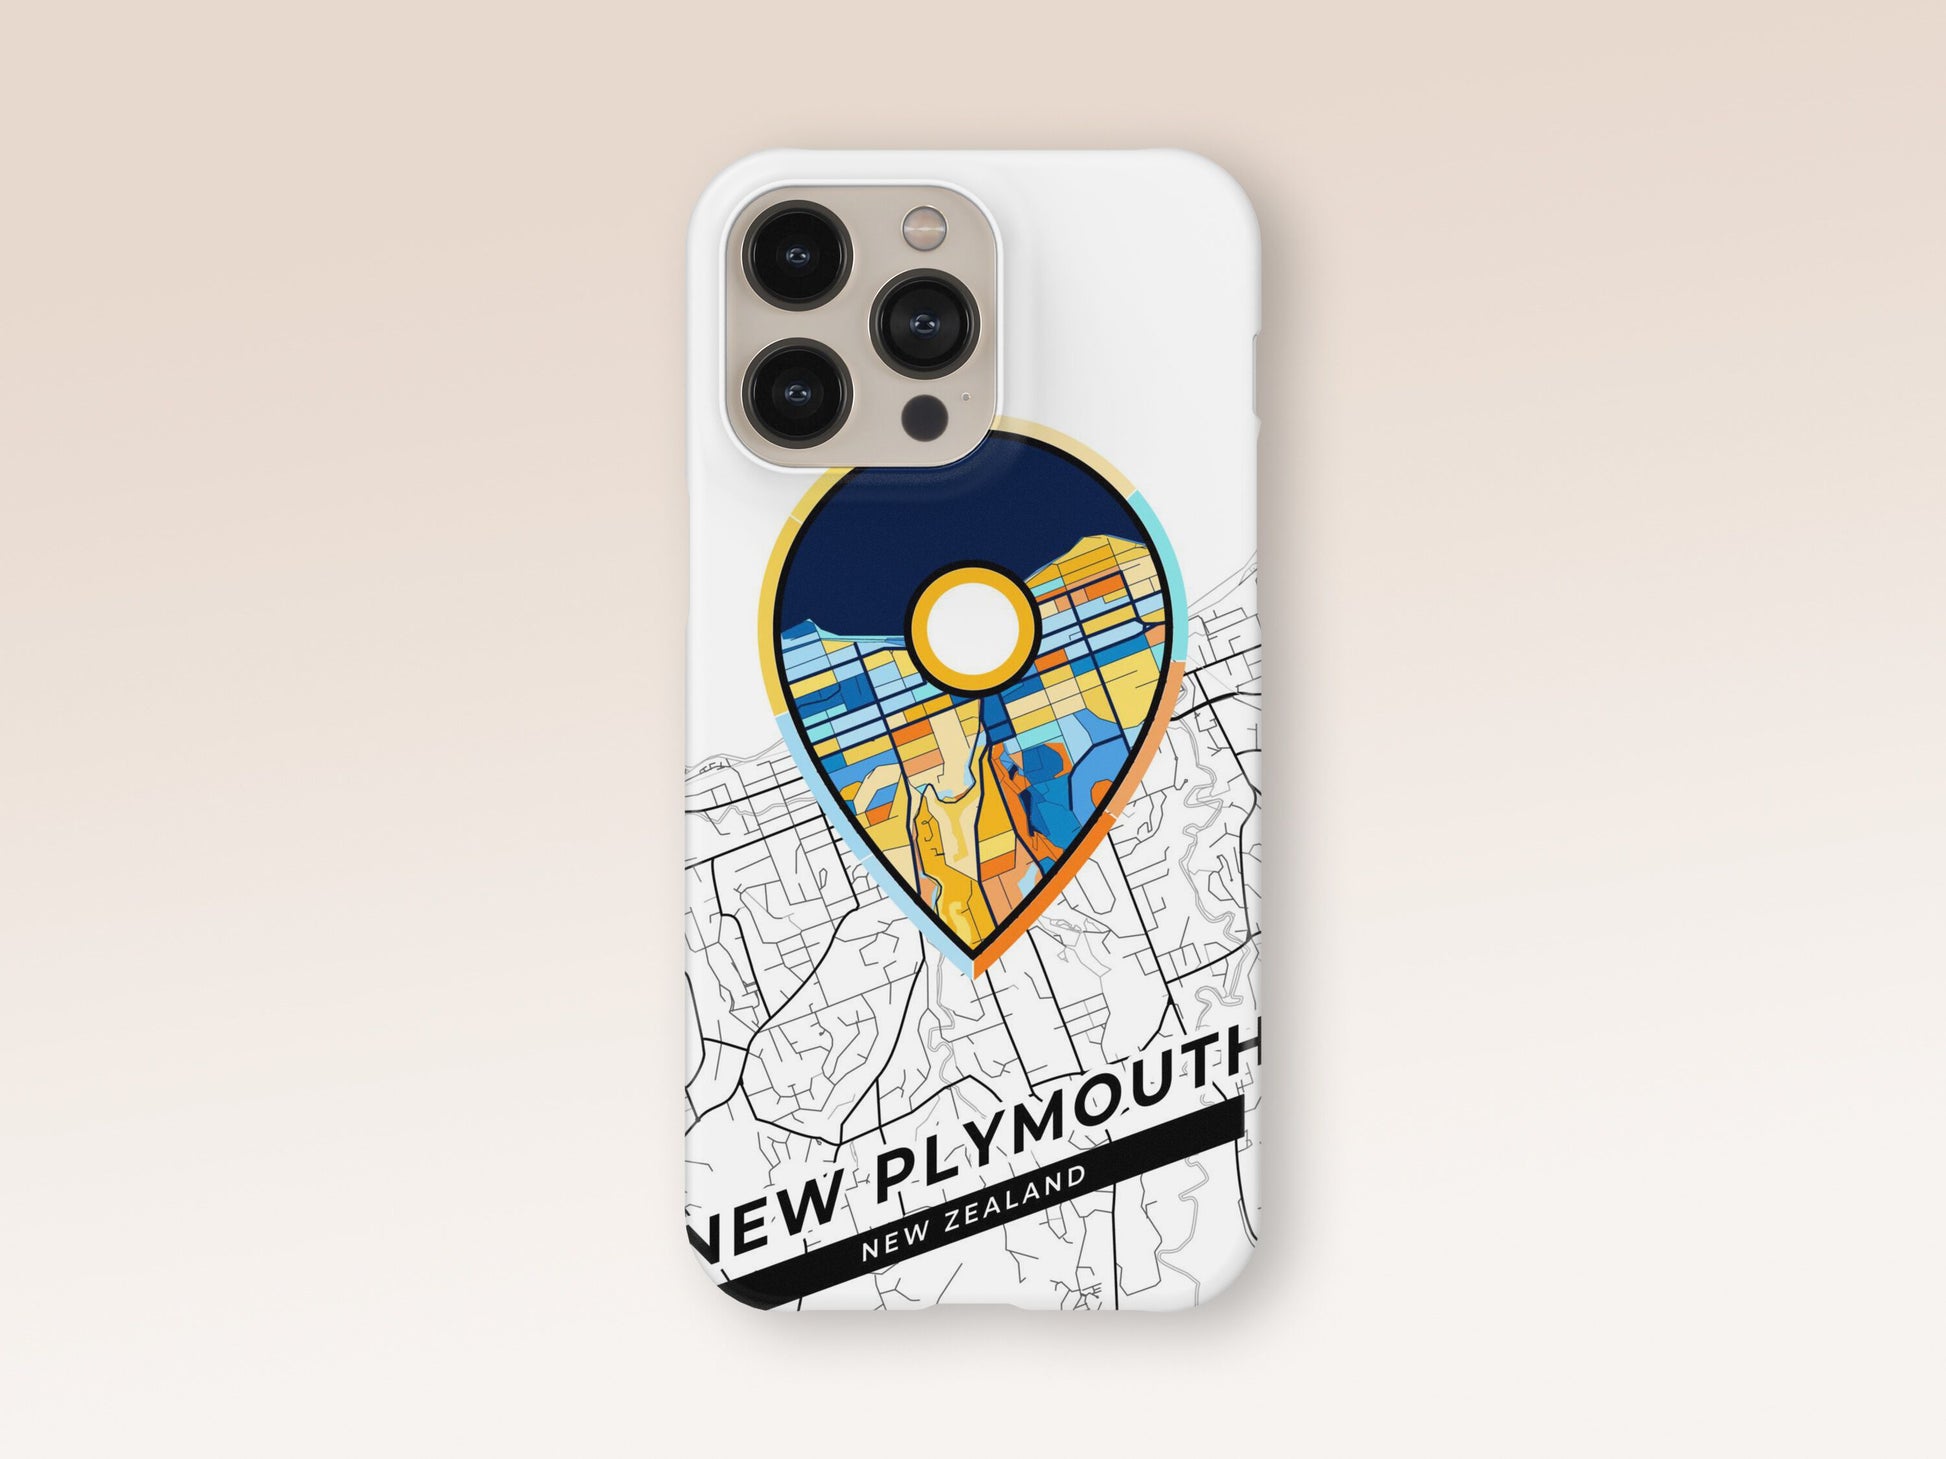 New Plymouth New Zealand slim phone case with colorful icon 1